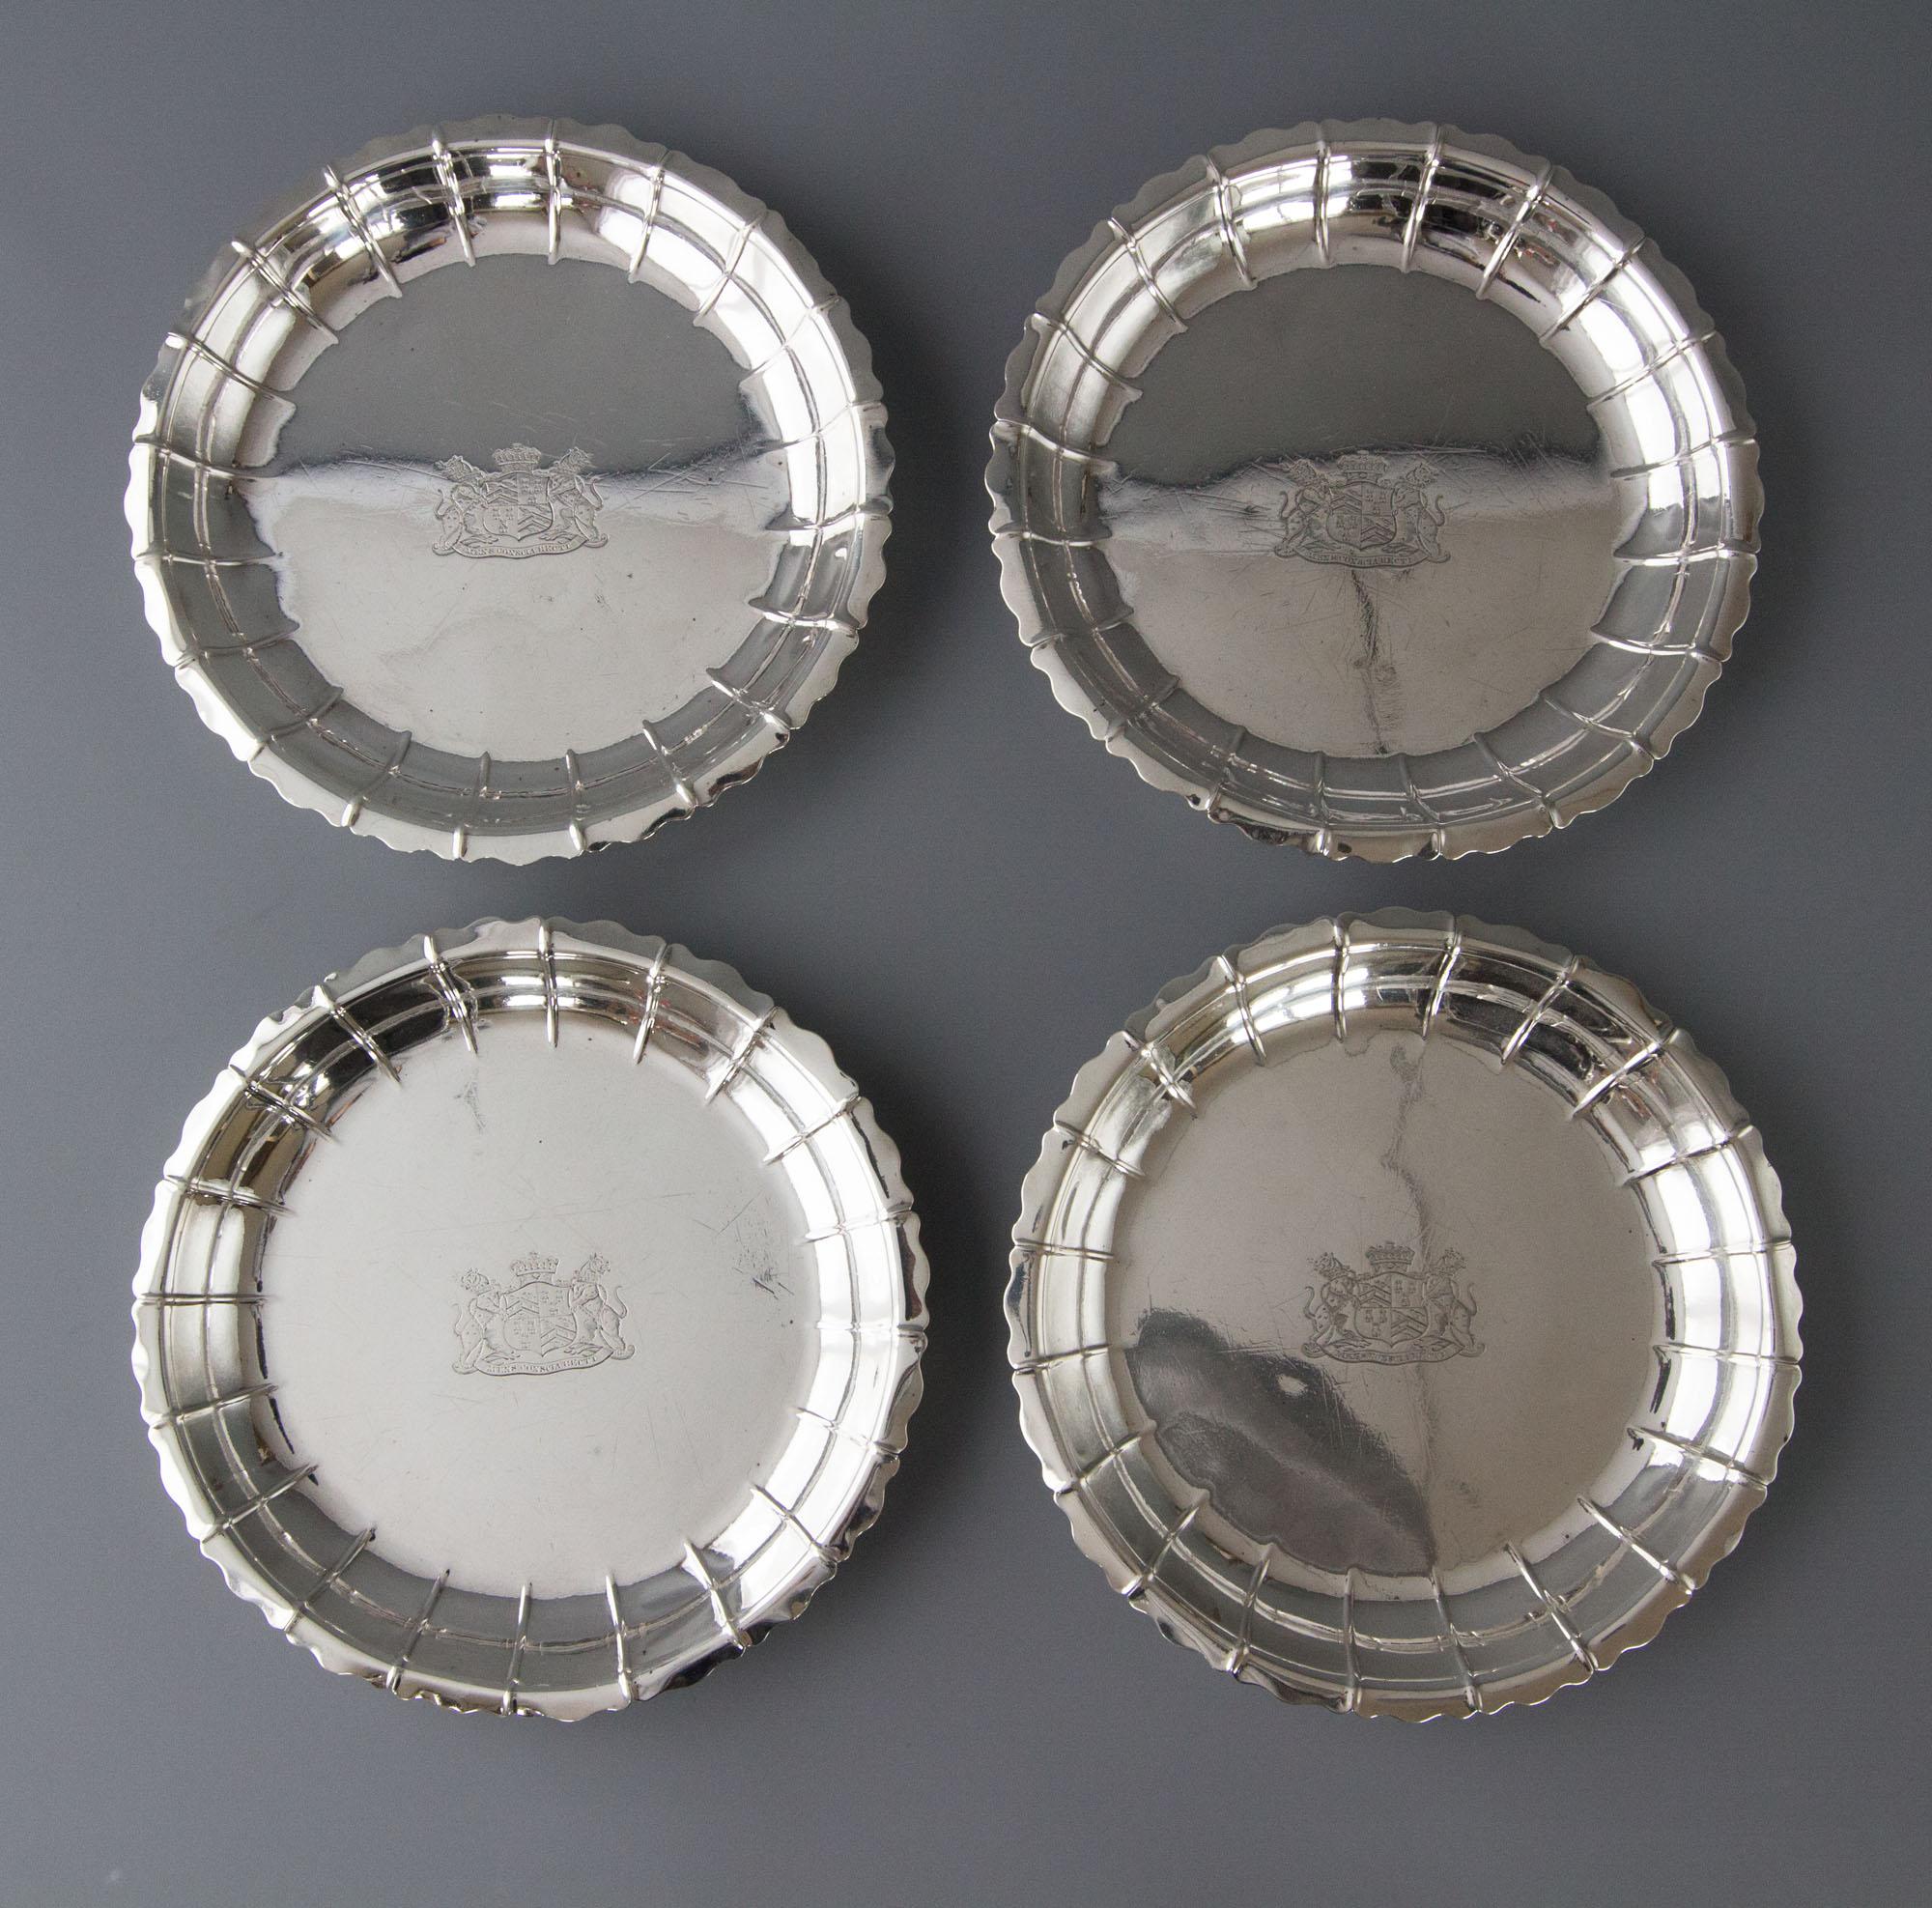 A very rare set of four silver strawberry or salad/serving dishes London 1835 by Robert Gerrard II. Each scalloped circular body with wavy rim, the center engraved with an armorial for Viscount Ashbrook. (See photo), with the motto 'Mens conscia